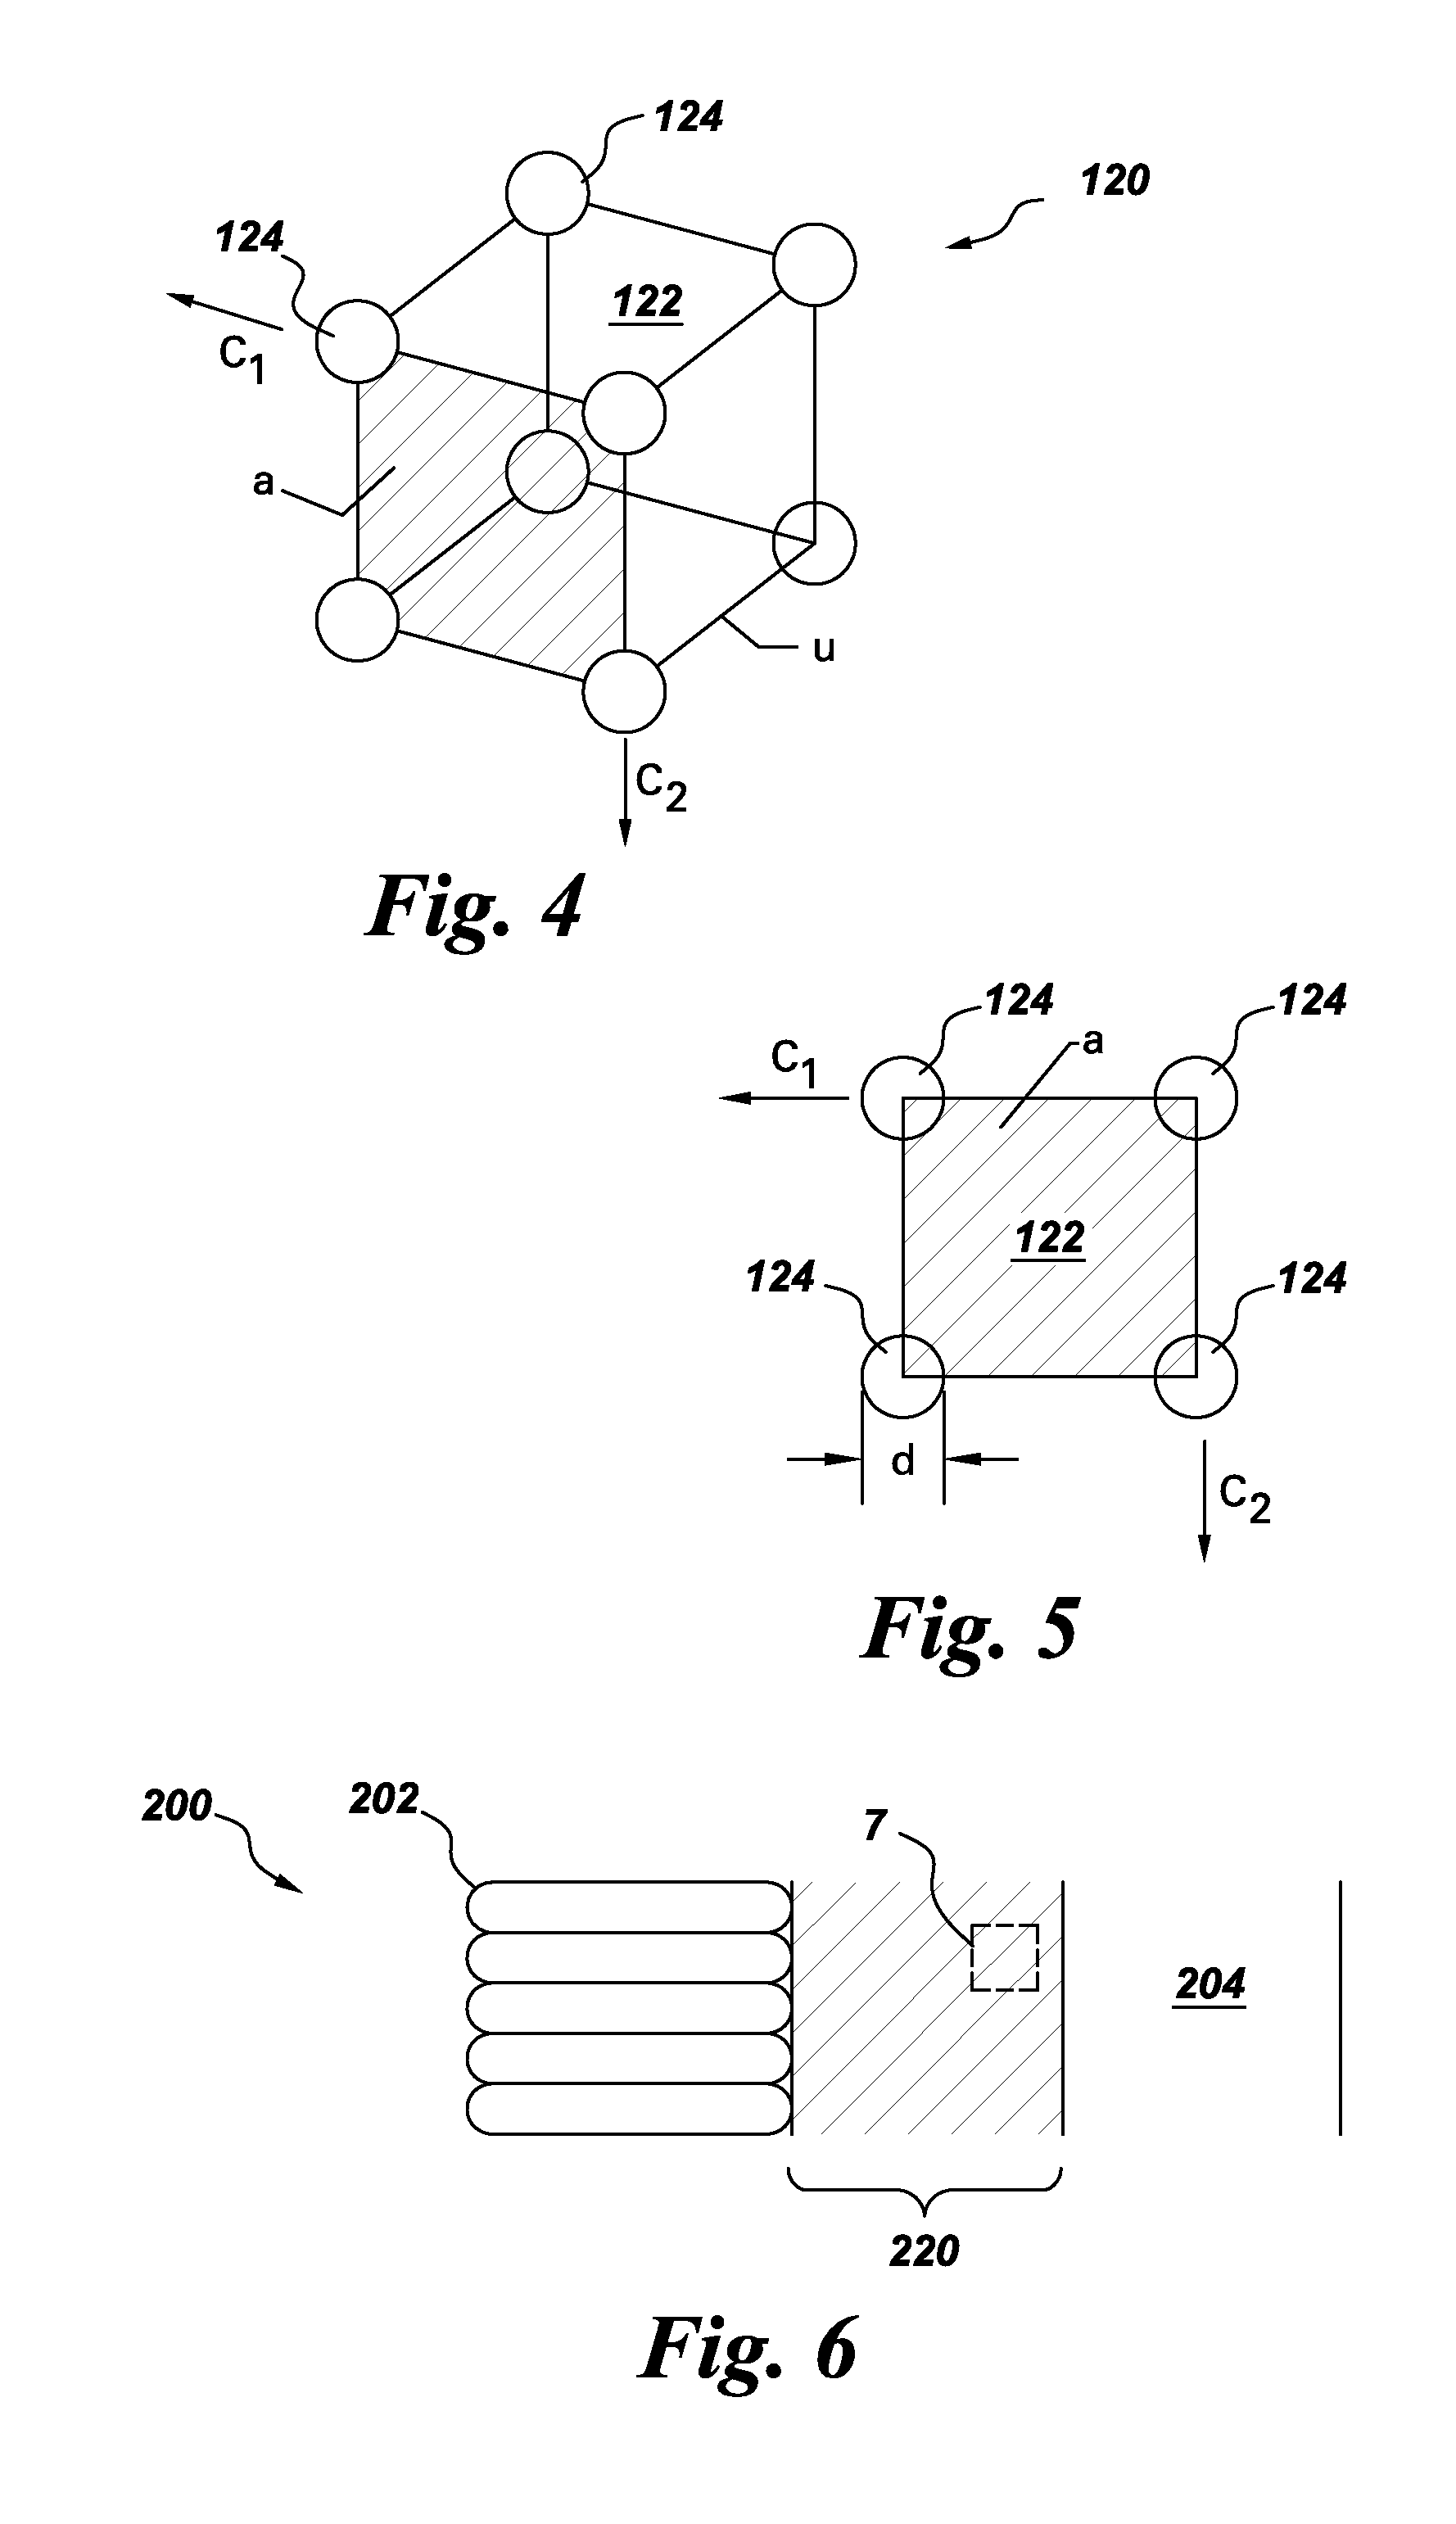 Insulating compositions and devices incorporating the same